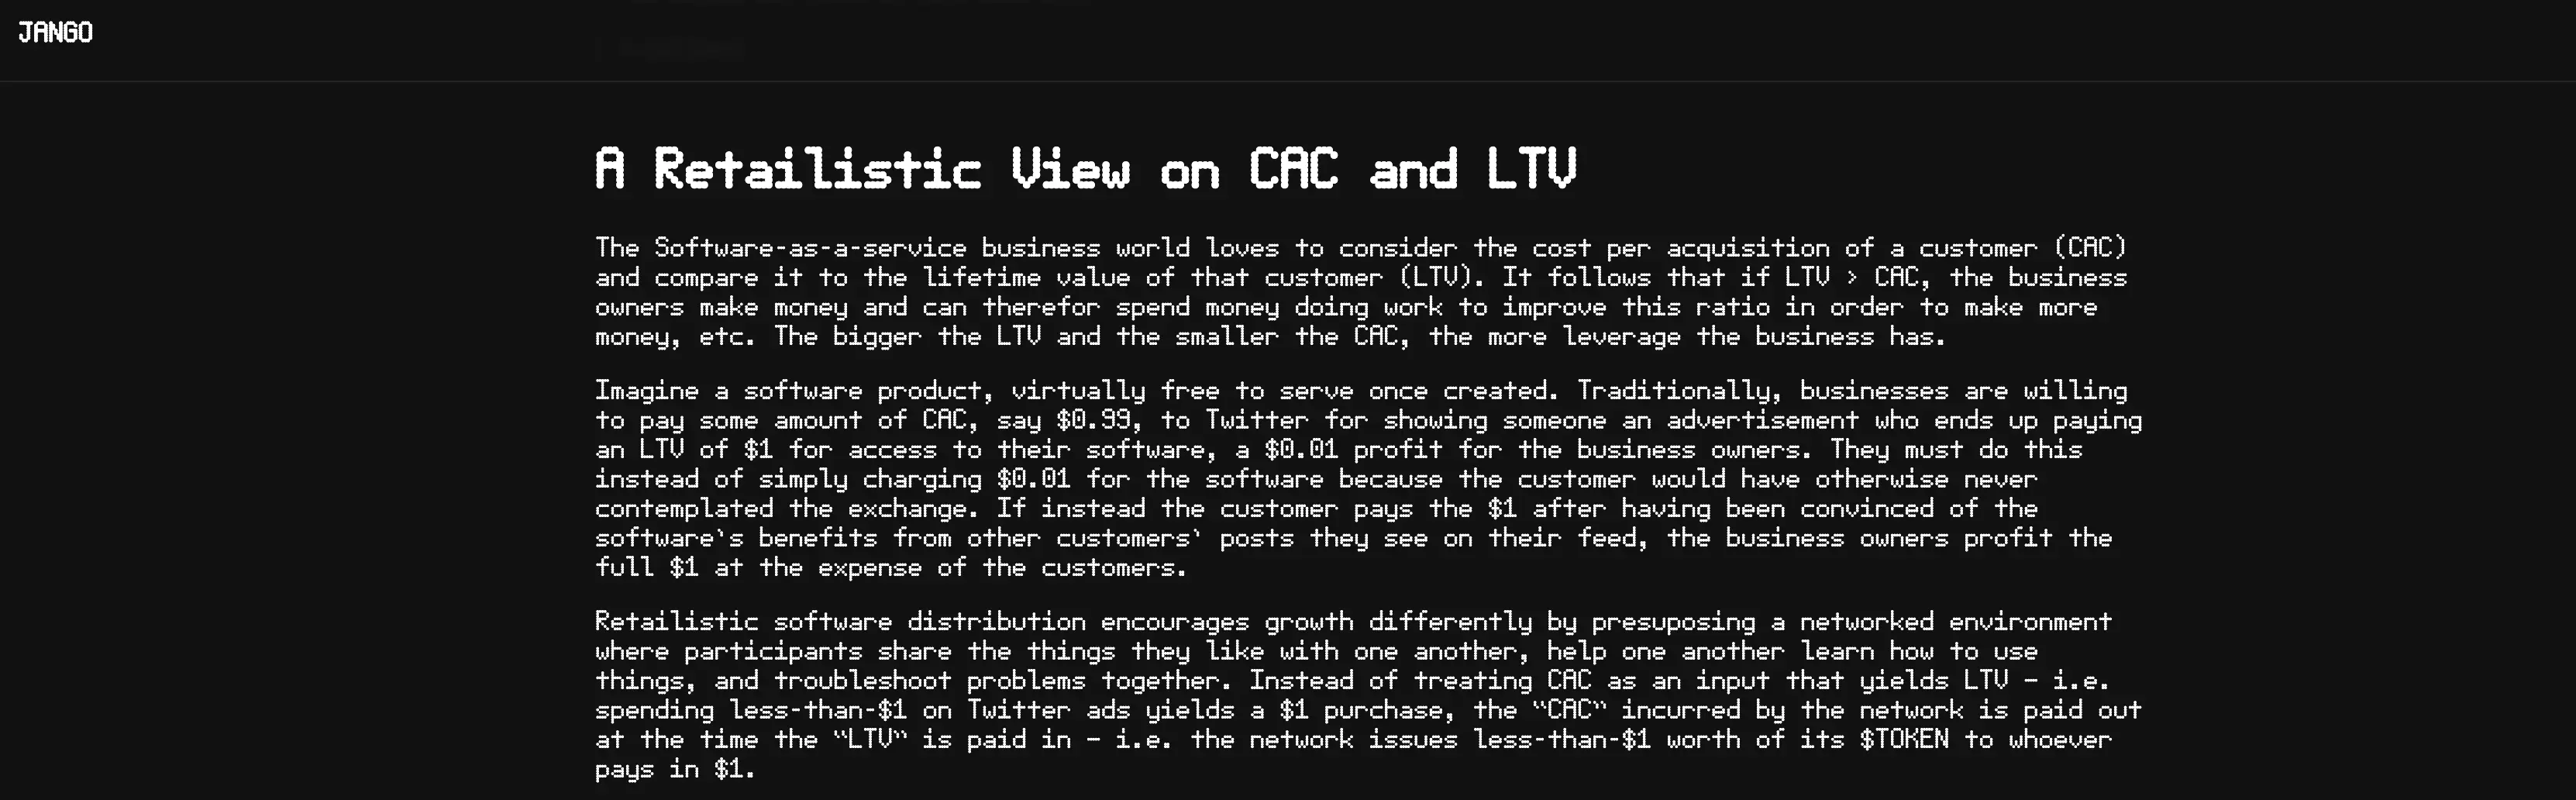 A Retailistic View on CAC and LTV